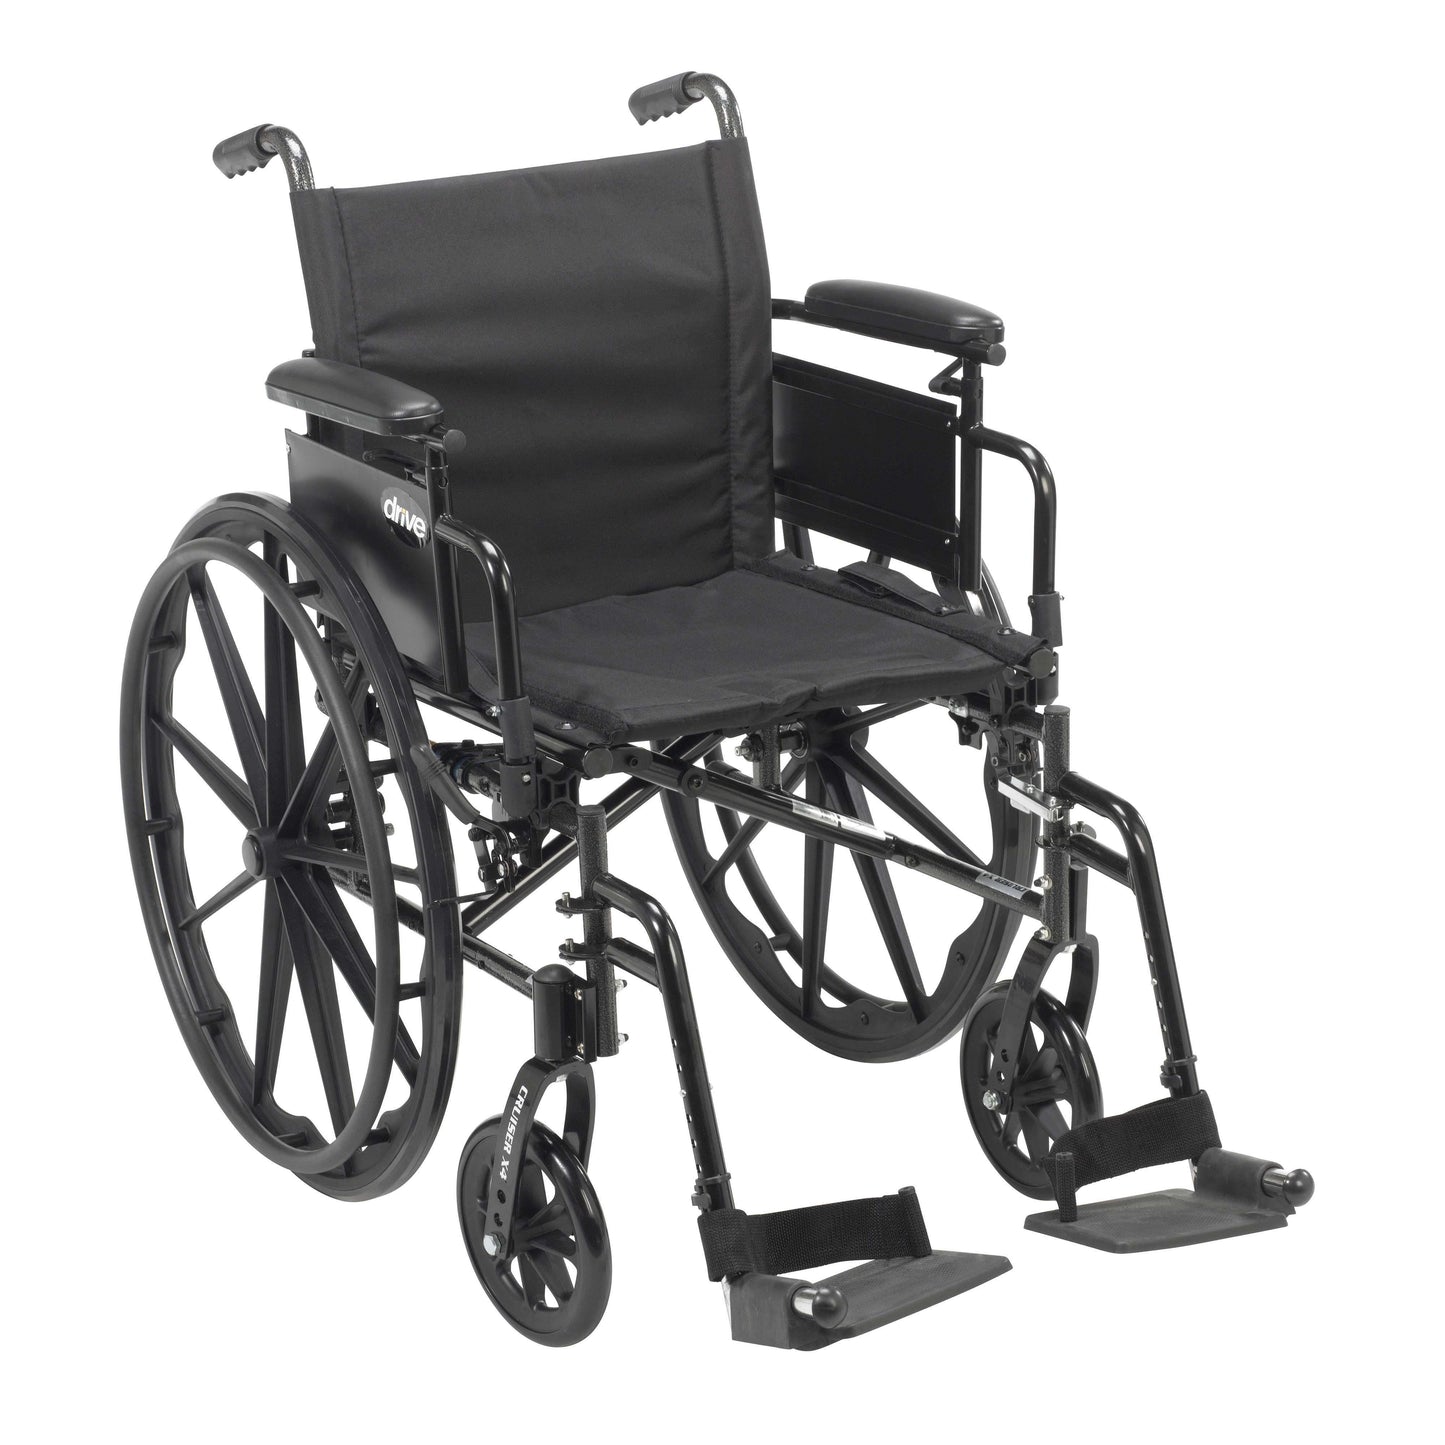 Drive cx420adda-sf Cruiser X4 Lightweight Dual Axle Wheelchair with Adjustable Detachable Arms, Desk Arms, Swing Away Footrests, 20" Seat